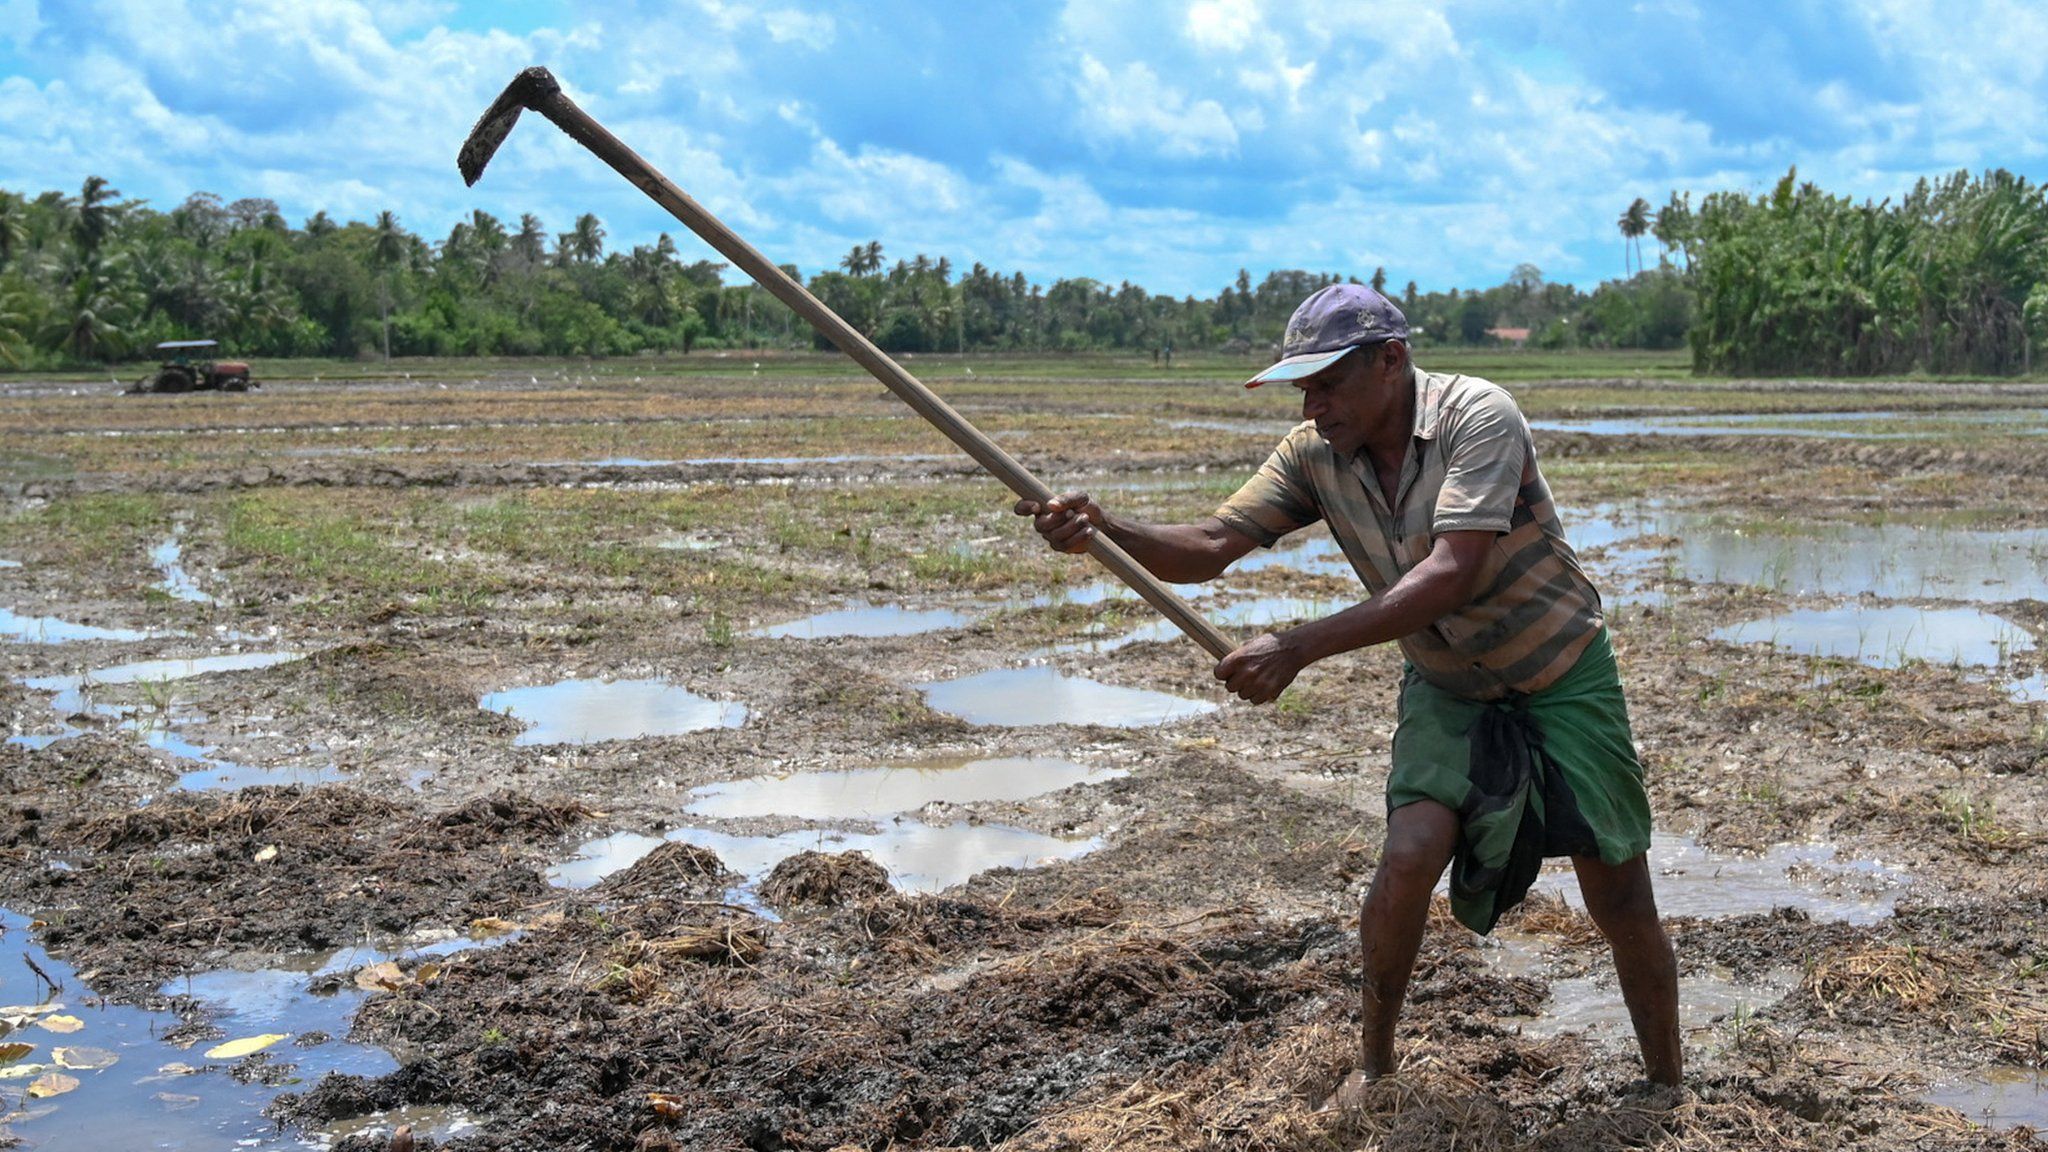 In this picture taken on April 23, 2022, farmer Jinadasa Paranamana works in a paddy field in Tissamaharama, Hambantota district.